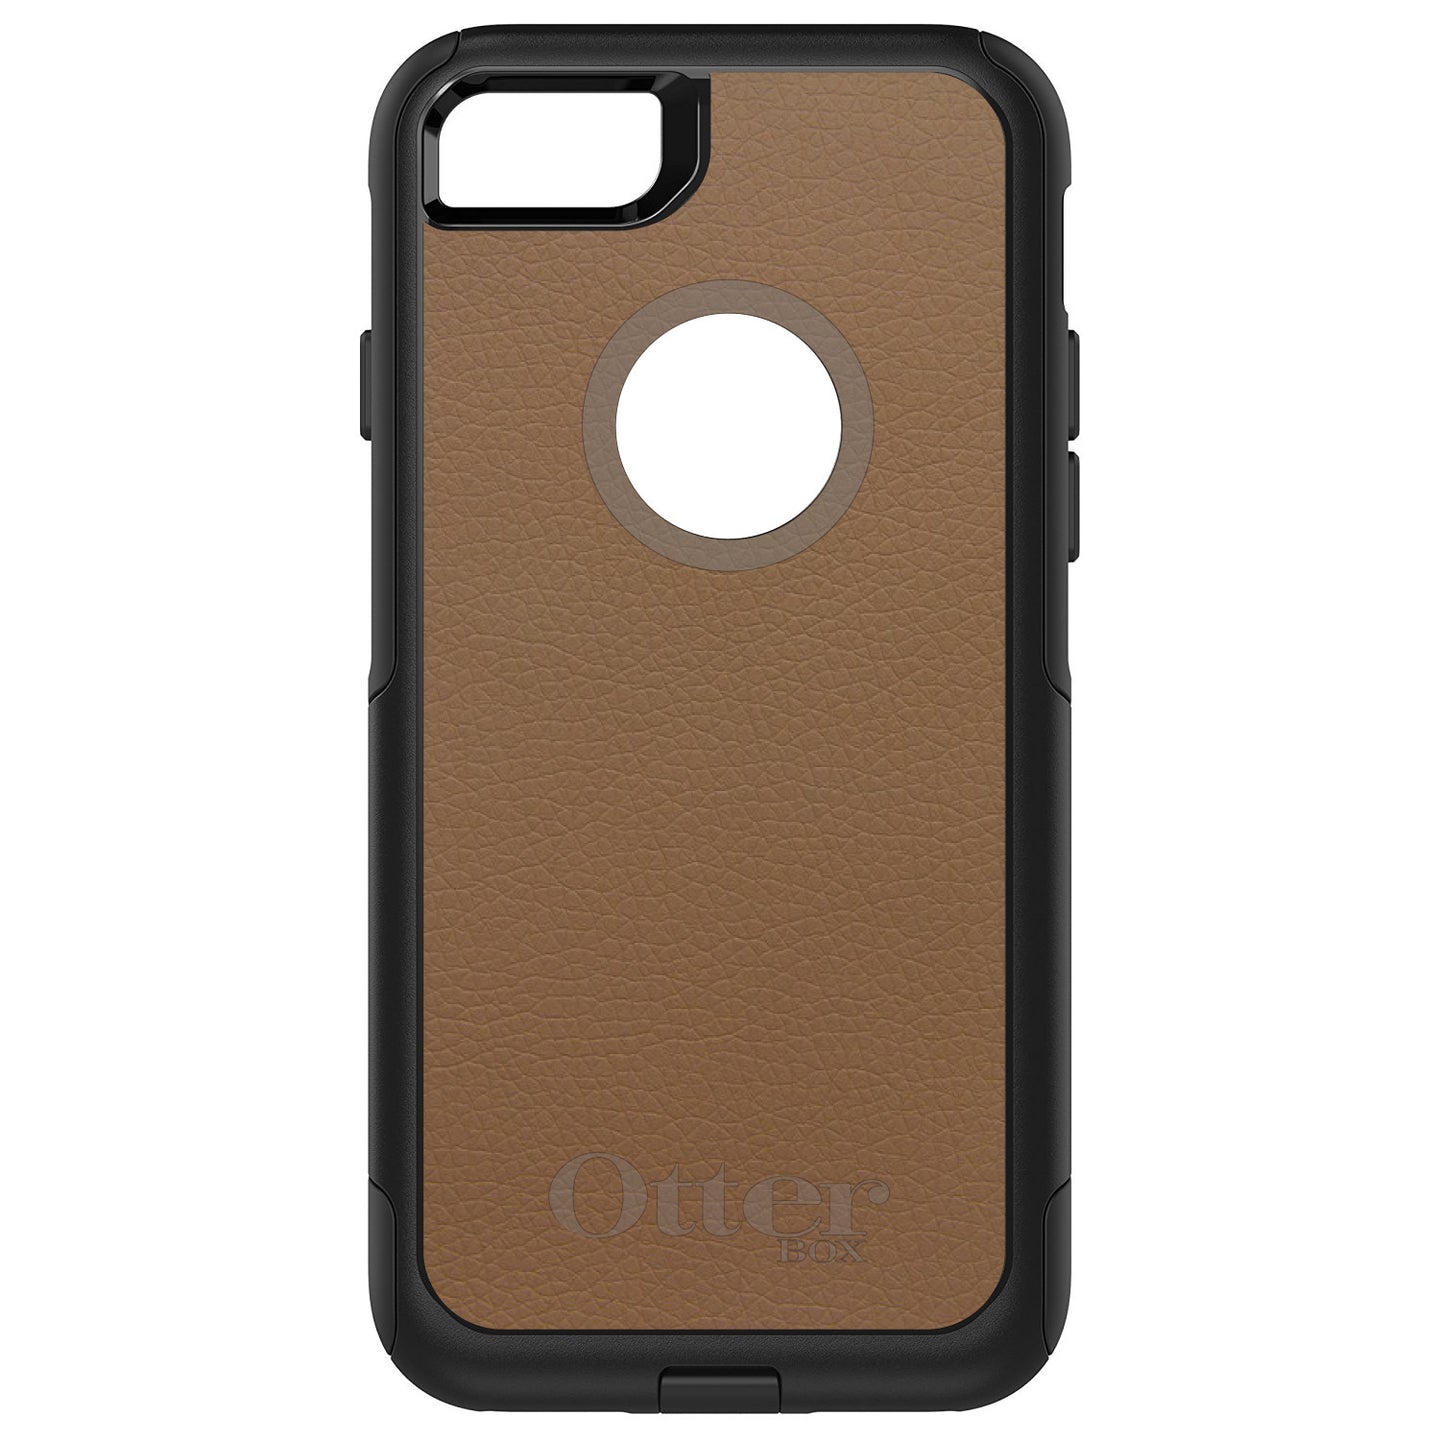 DistinctInk™ OtterBox Commuter Series Case for Apple iPhone or Samsung Galaxy - Brown Leather Print Design